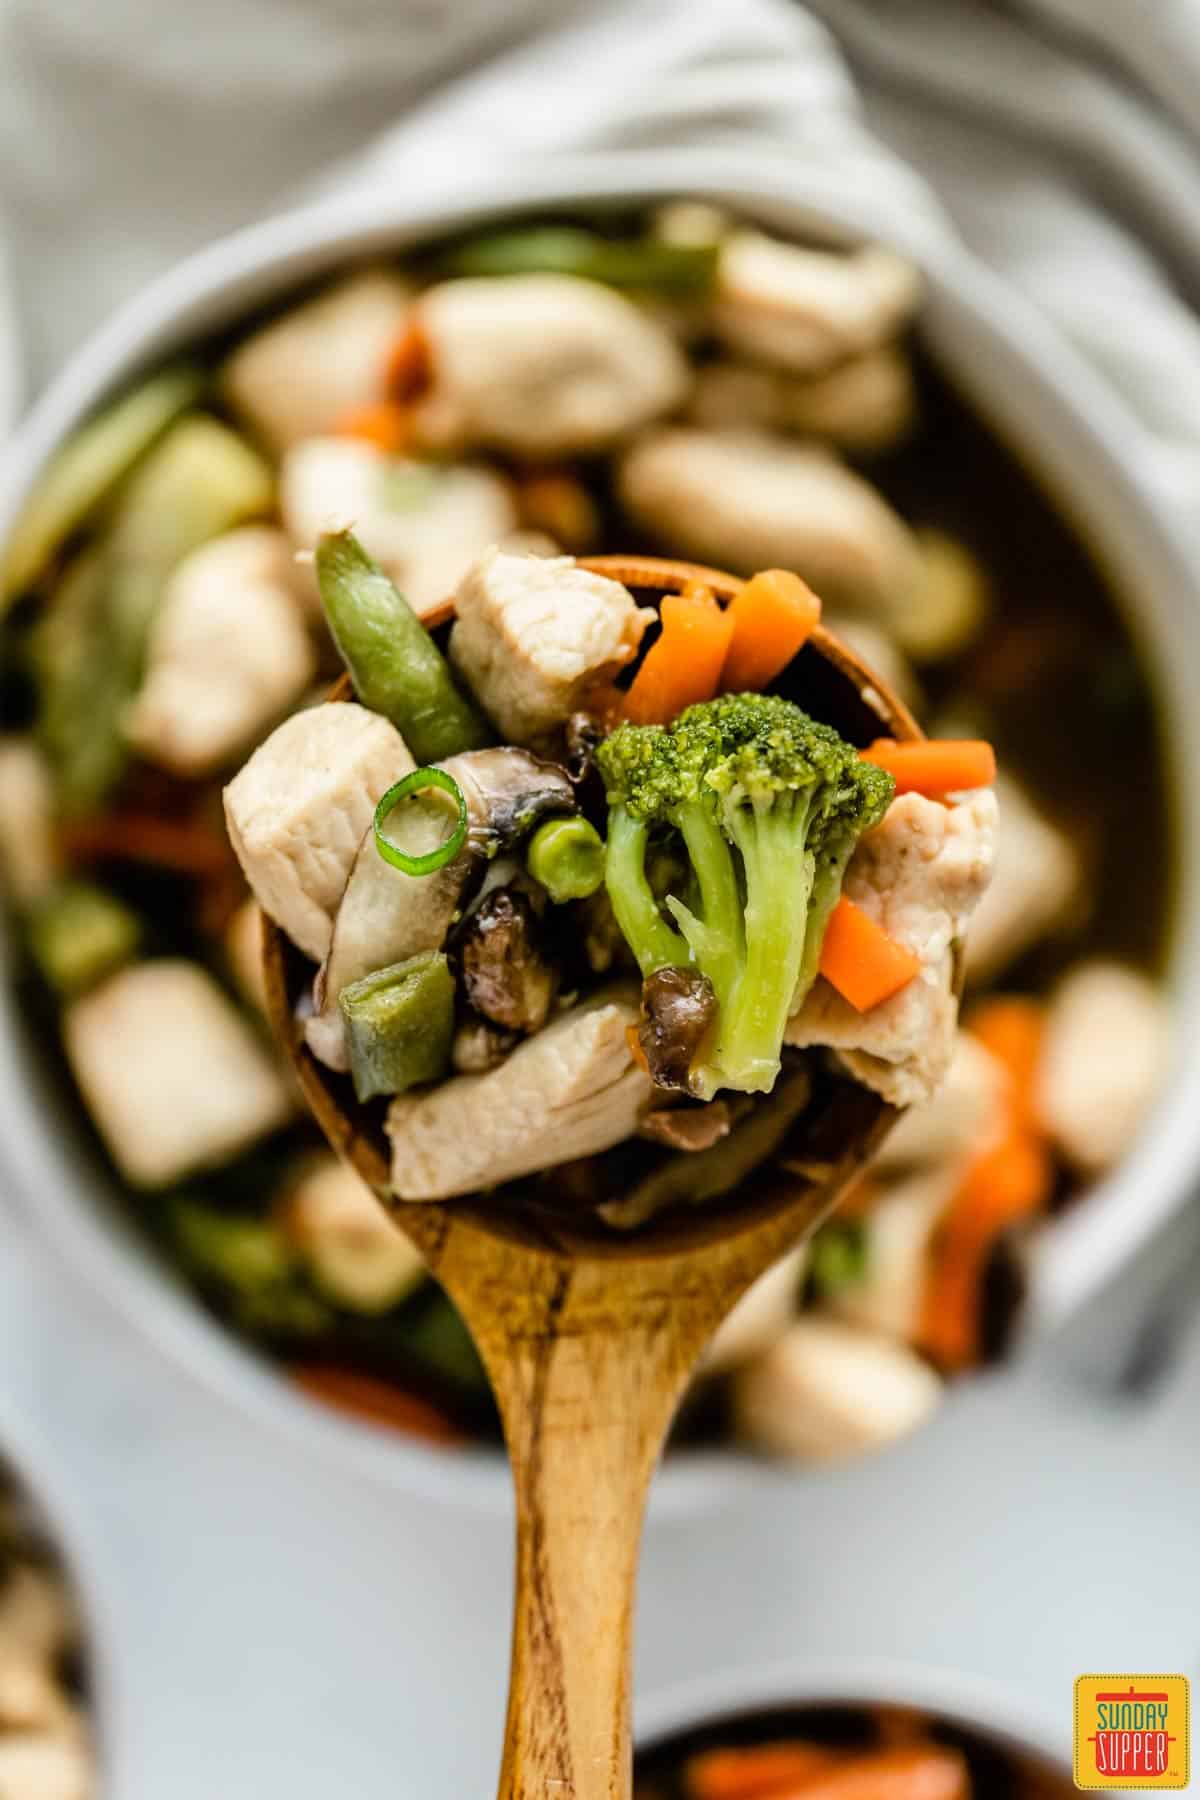 A wooden spoon with a serving of chicken stir-fry lifted out of a bowl in the background